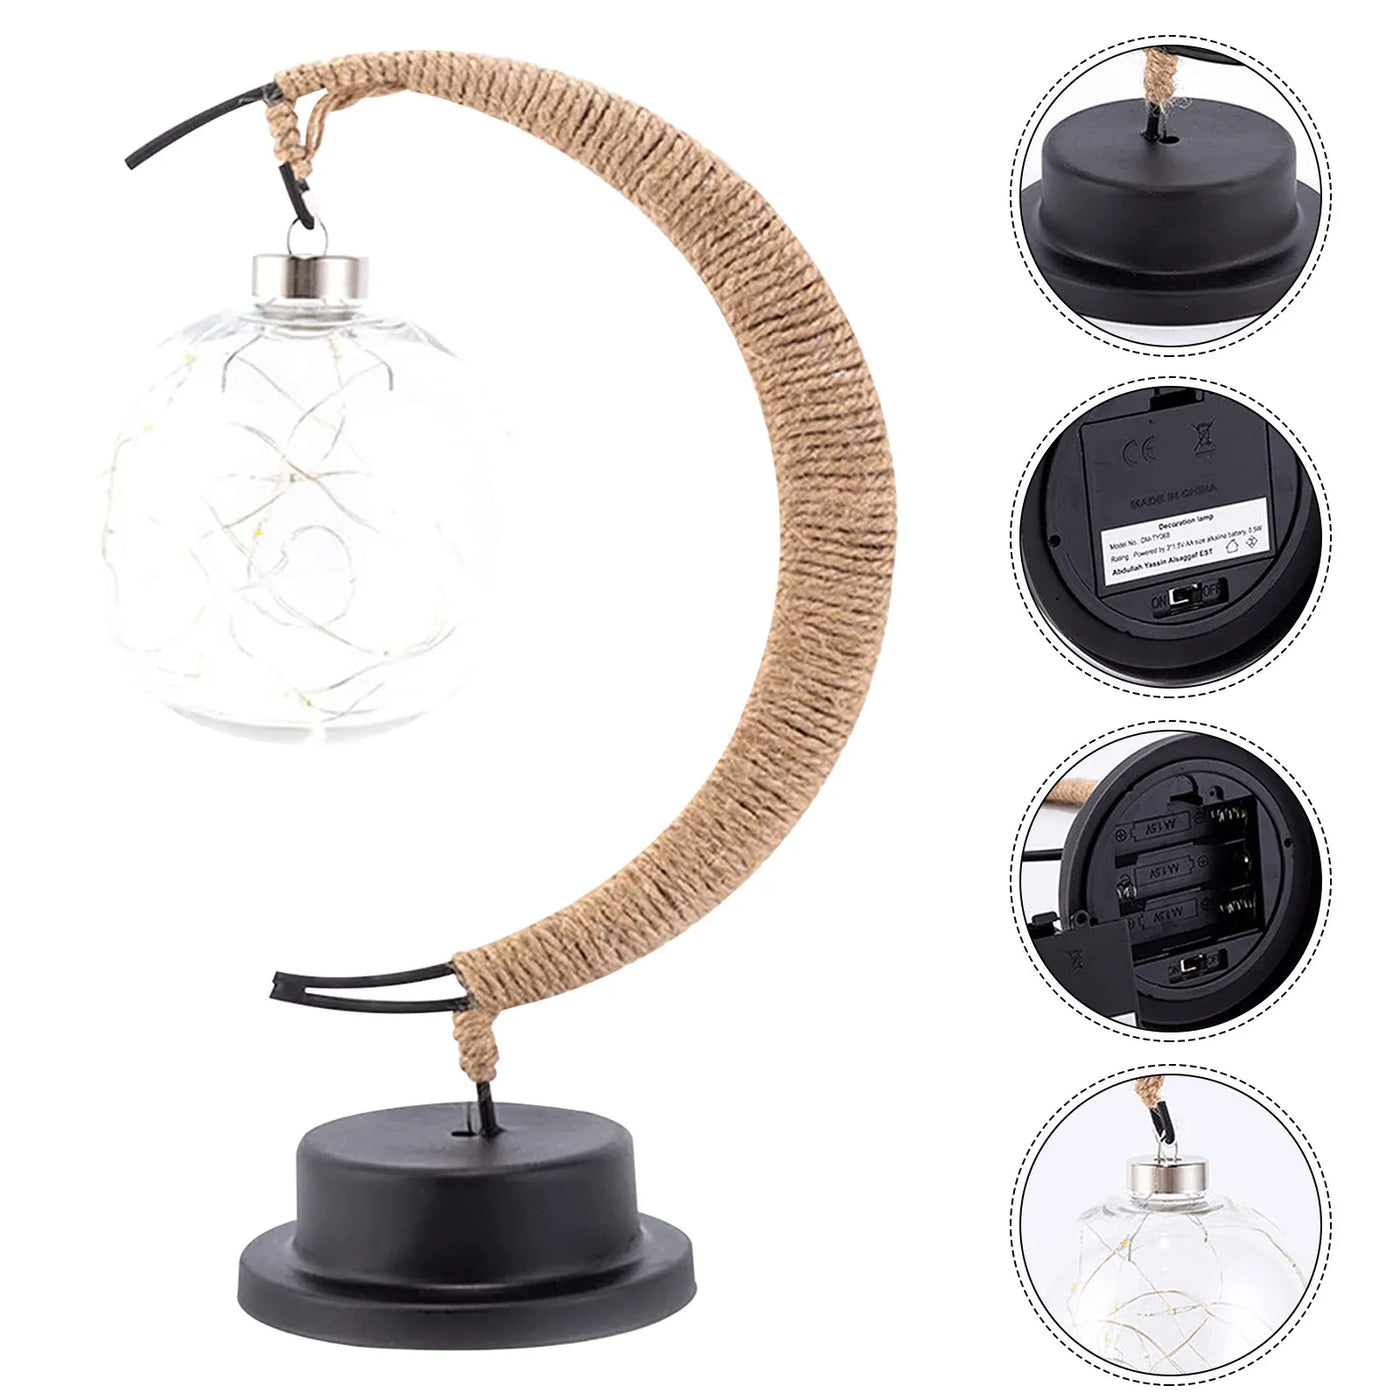 Enchanted Lunar Lamp Hanging Memorial Moon LED Moon Lamp Ball Night Light with Stand Crescent Bedroom Table Kids Festival Gifts